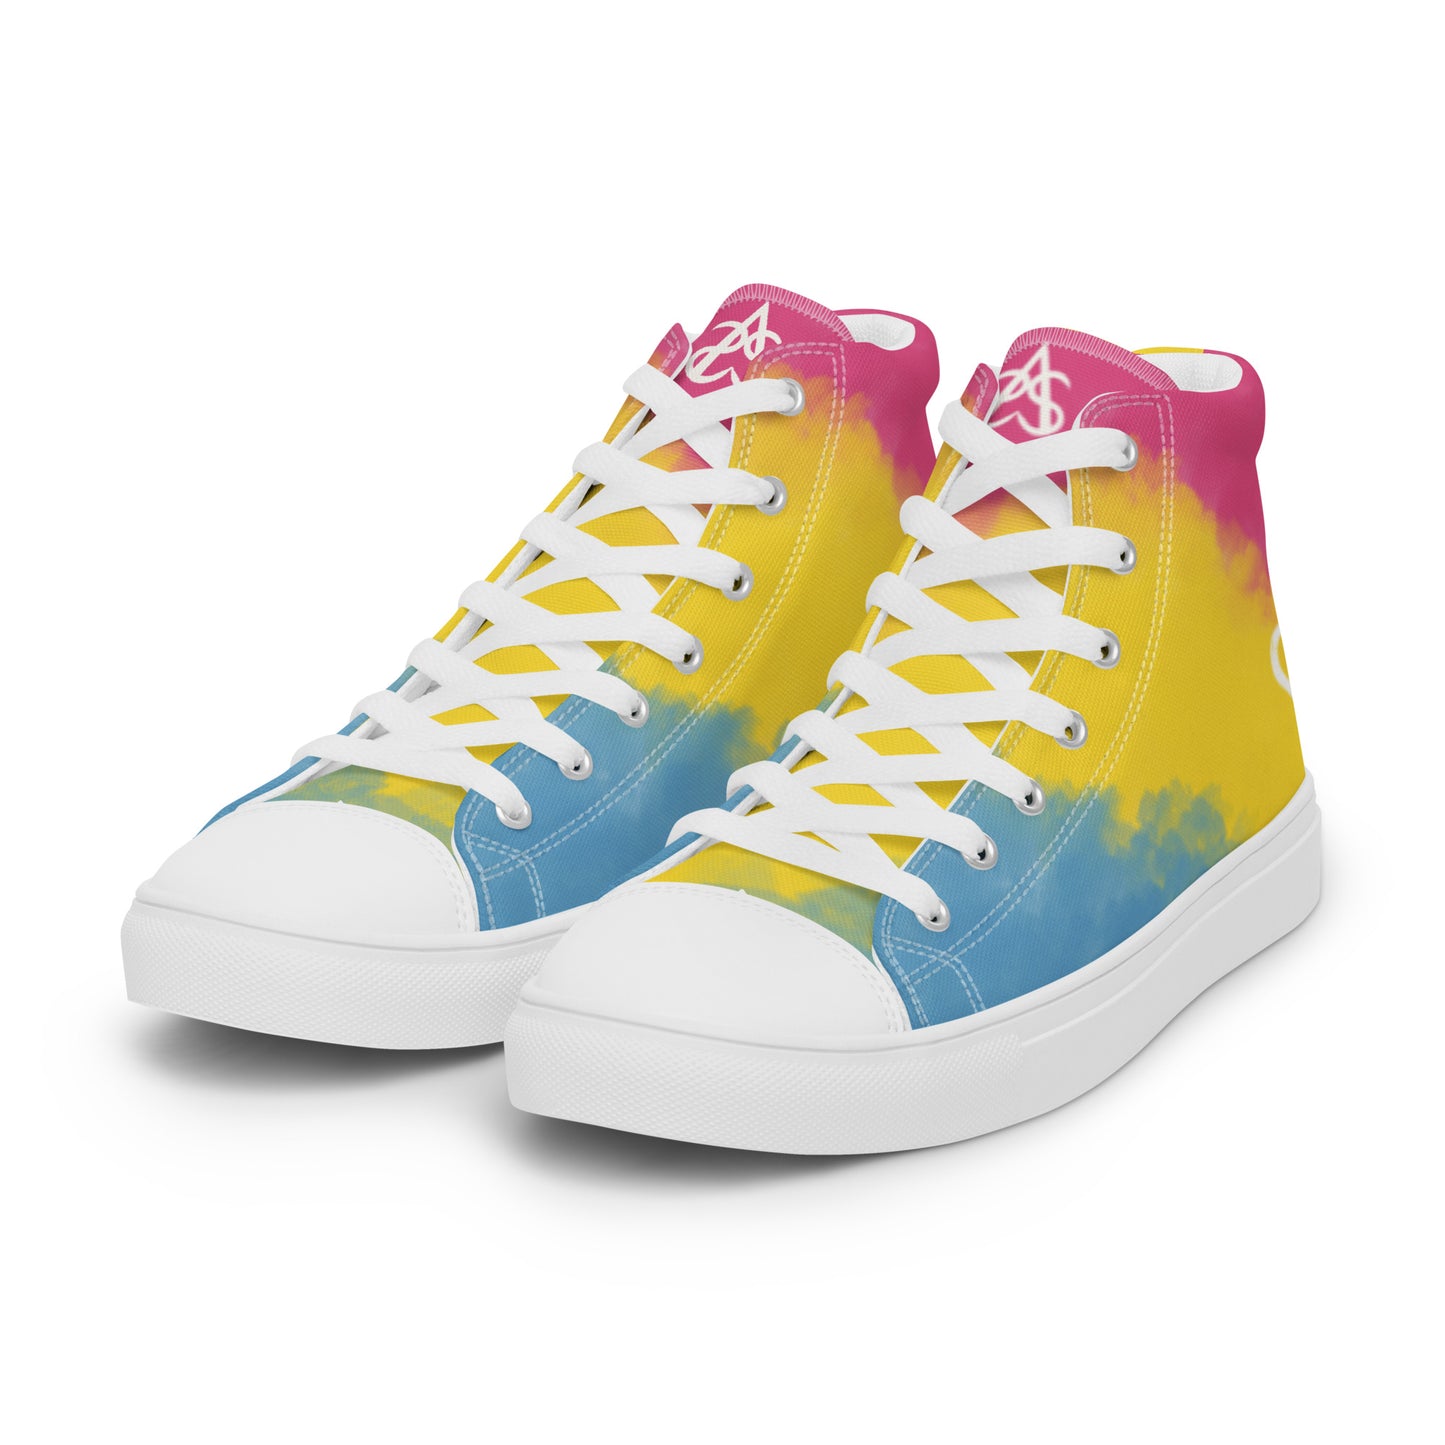 Left front view: a pair of high top shoes with color block pink, yellow, and blue clouds, a white hand drawn heart, and the Aras Sivad logo on the back.